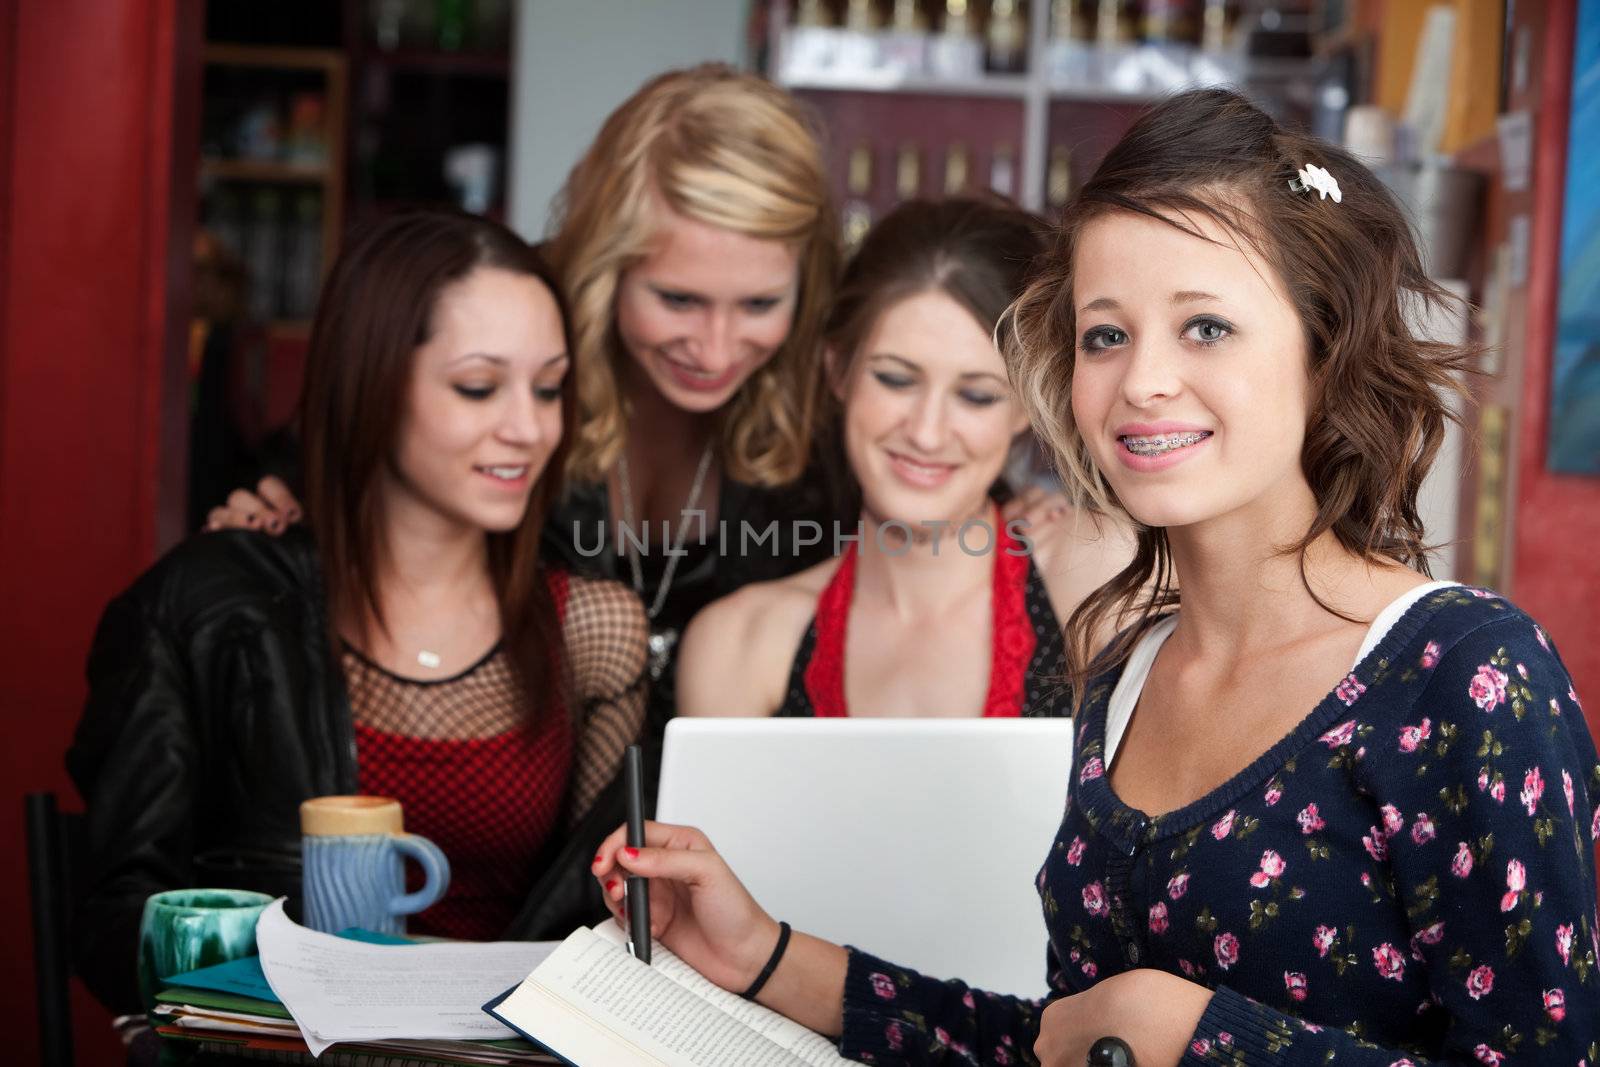 Cute teenaged girl does homework with friends in a cafe